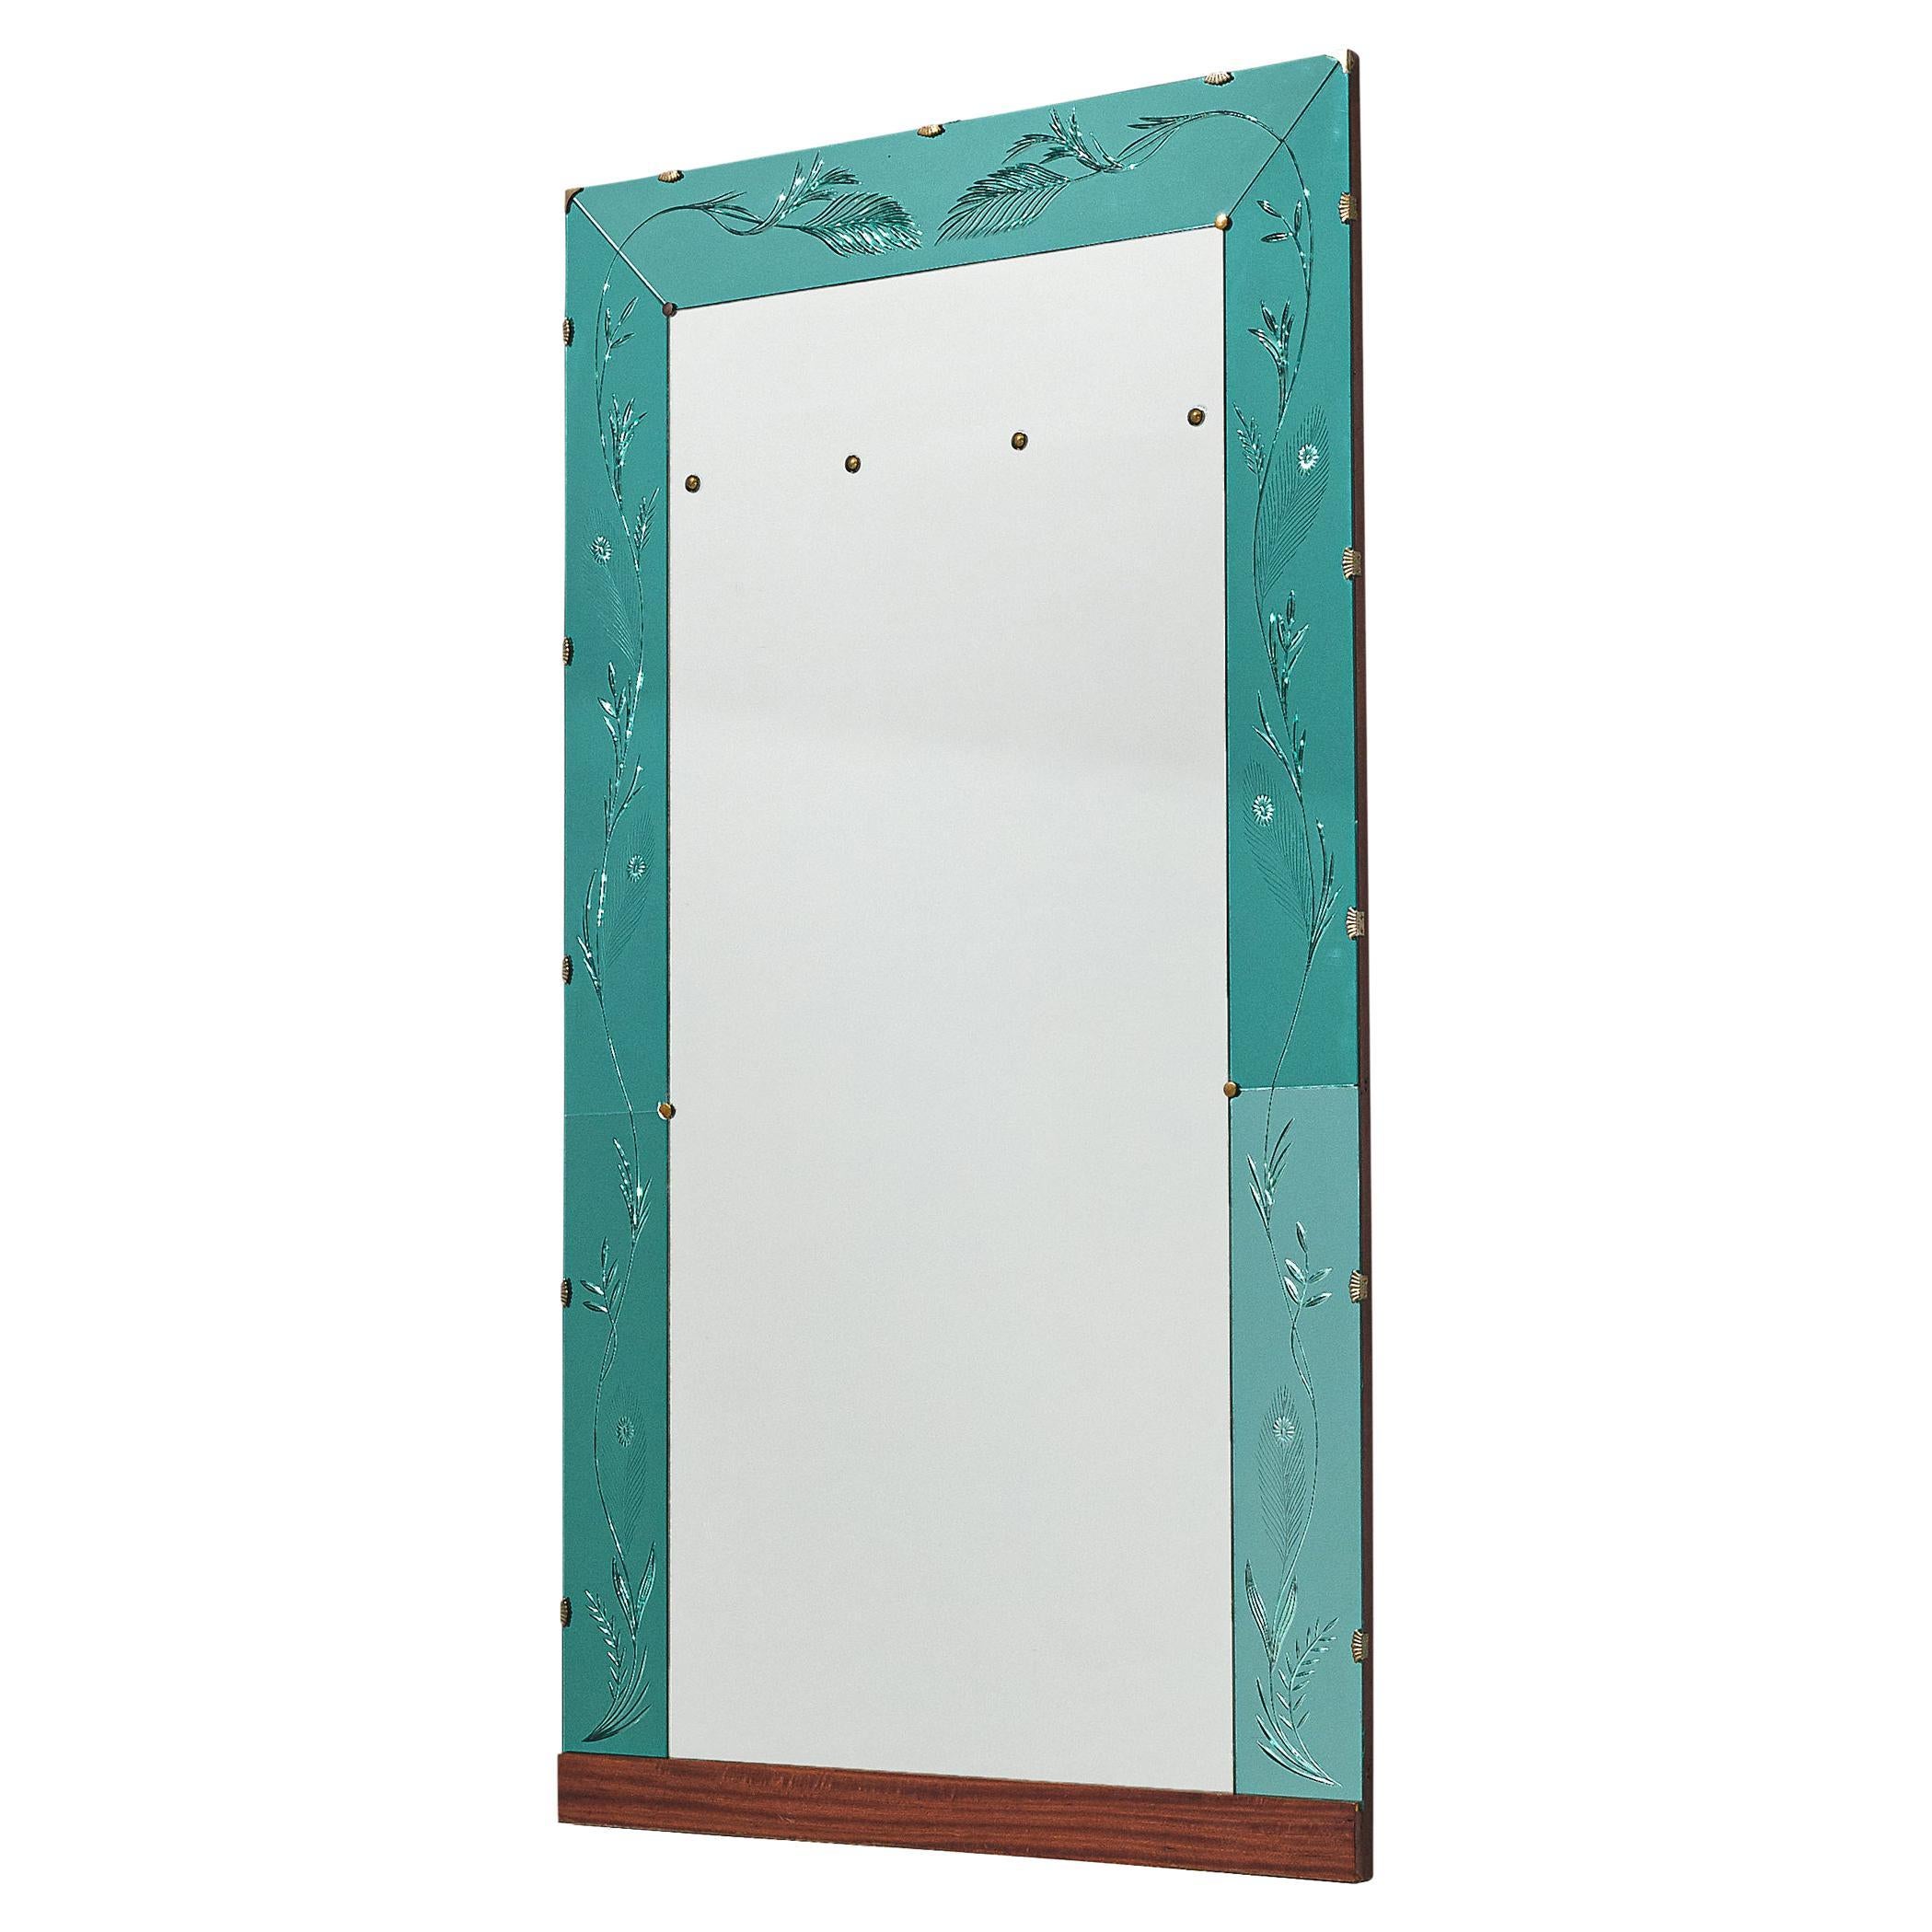 Elegant Italian Wall Mirror with Turquoise Ledge For Sale